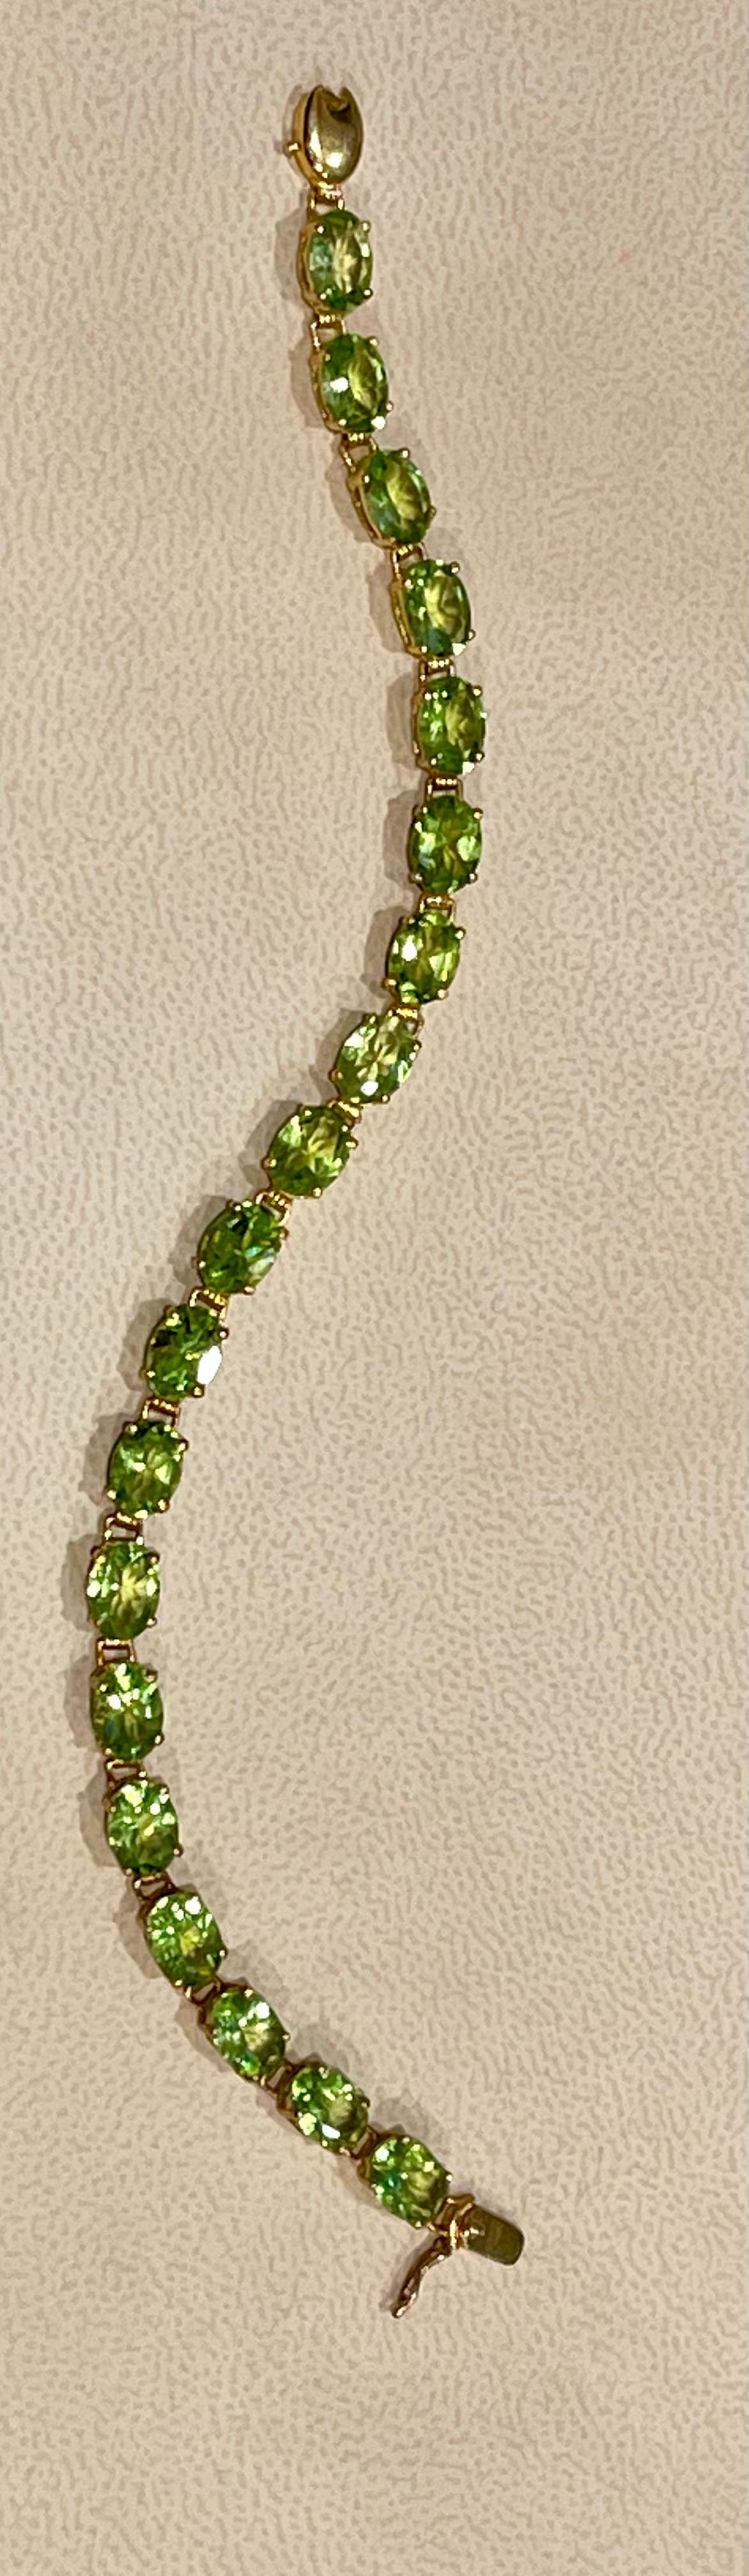 15 Carat Genuine Natural Pear Shape Peridot Tennis Bracelet 14 Karat Yellow Gold In Excellent Condition For Sale In New York, NY